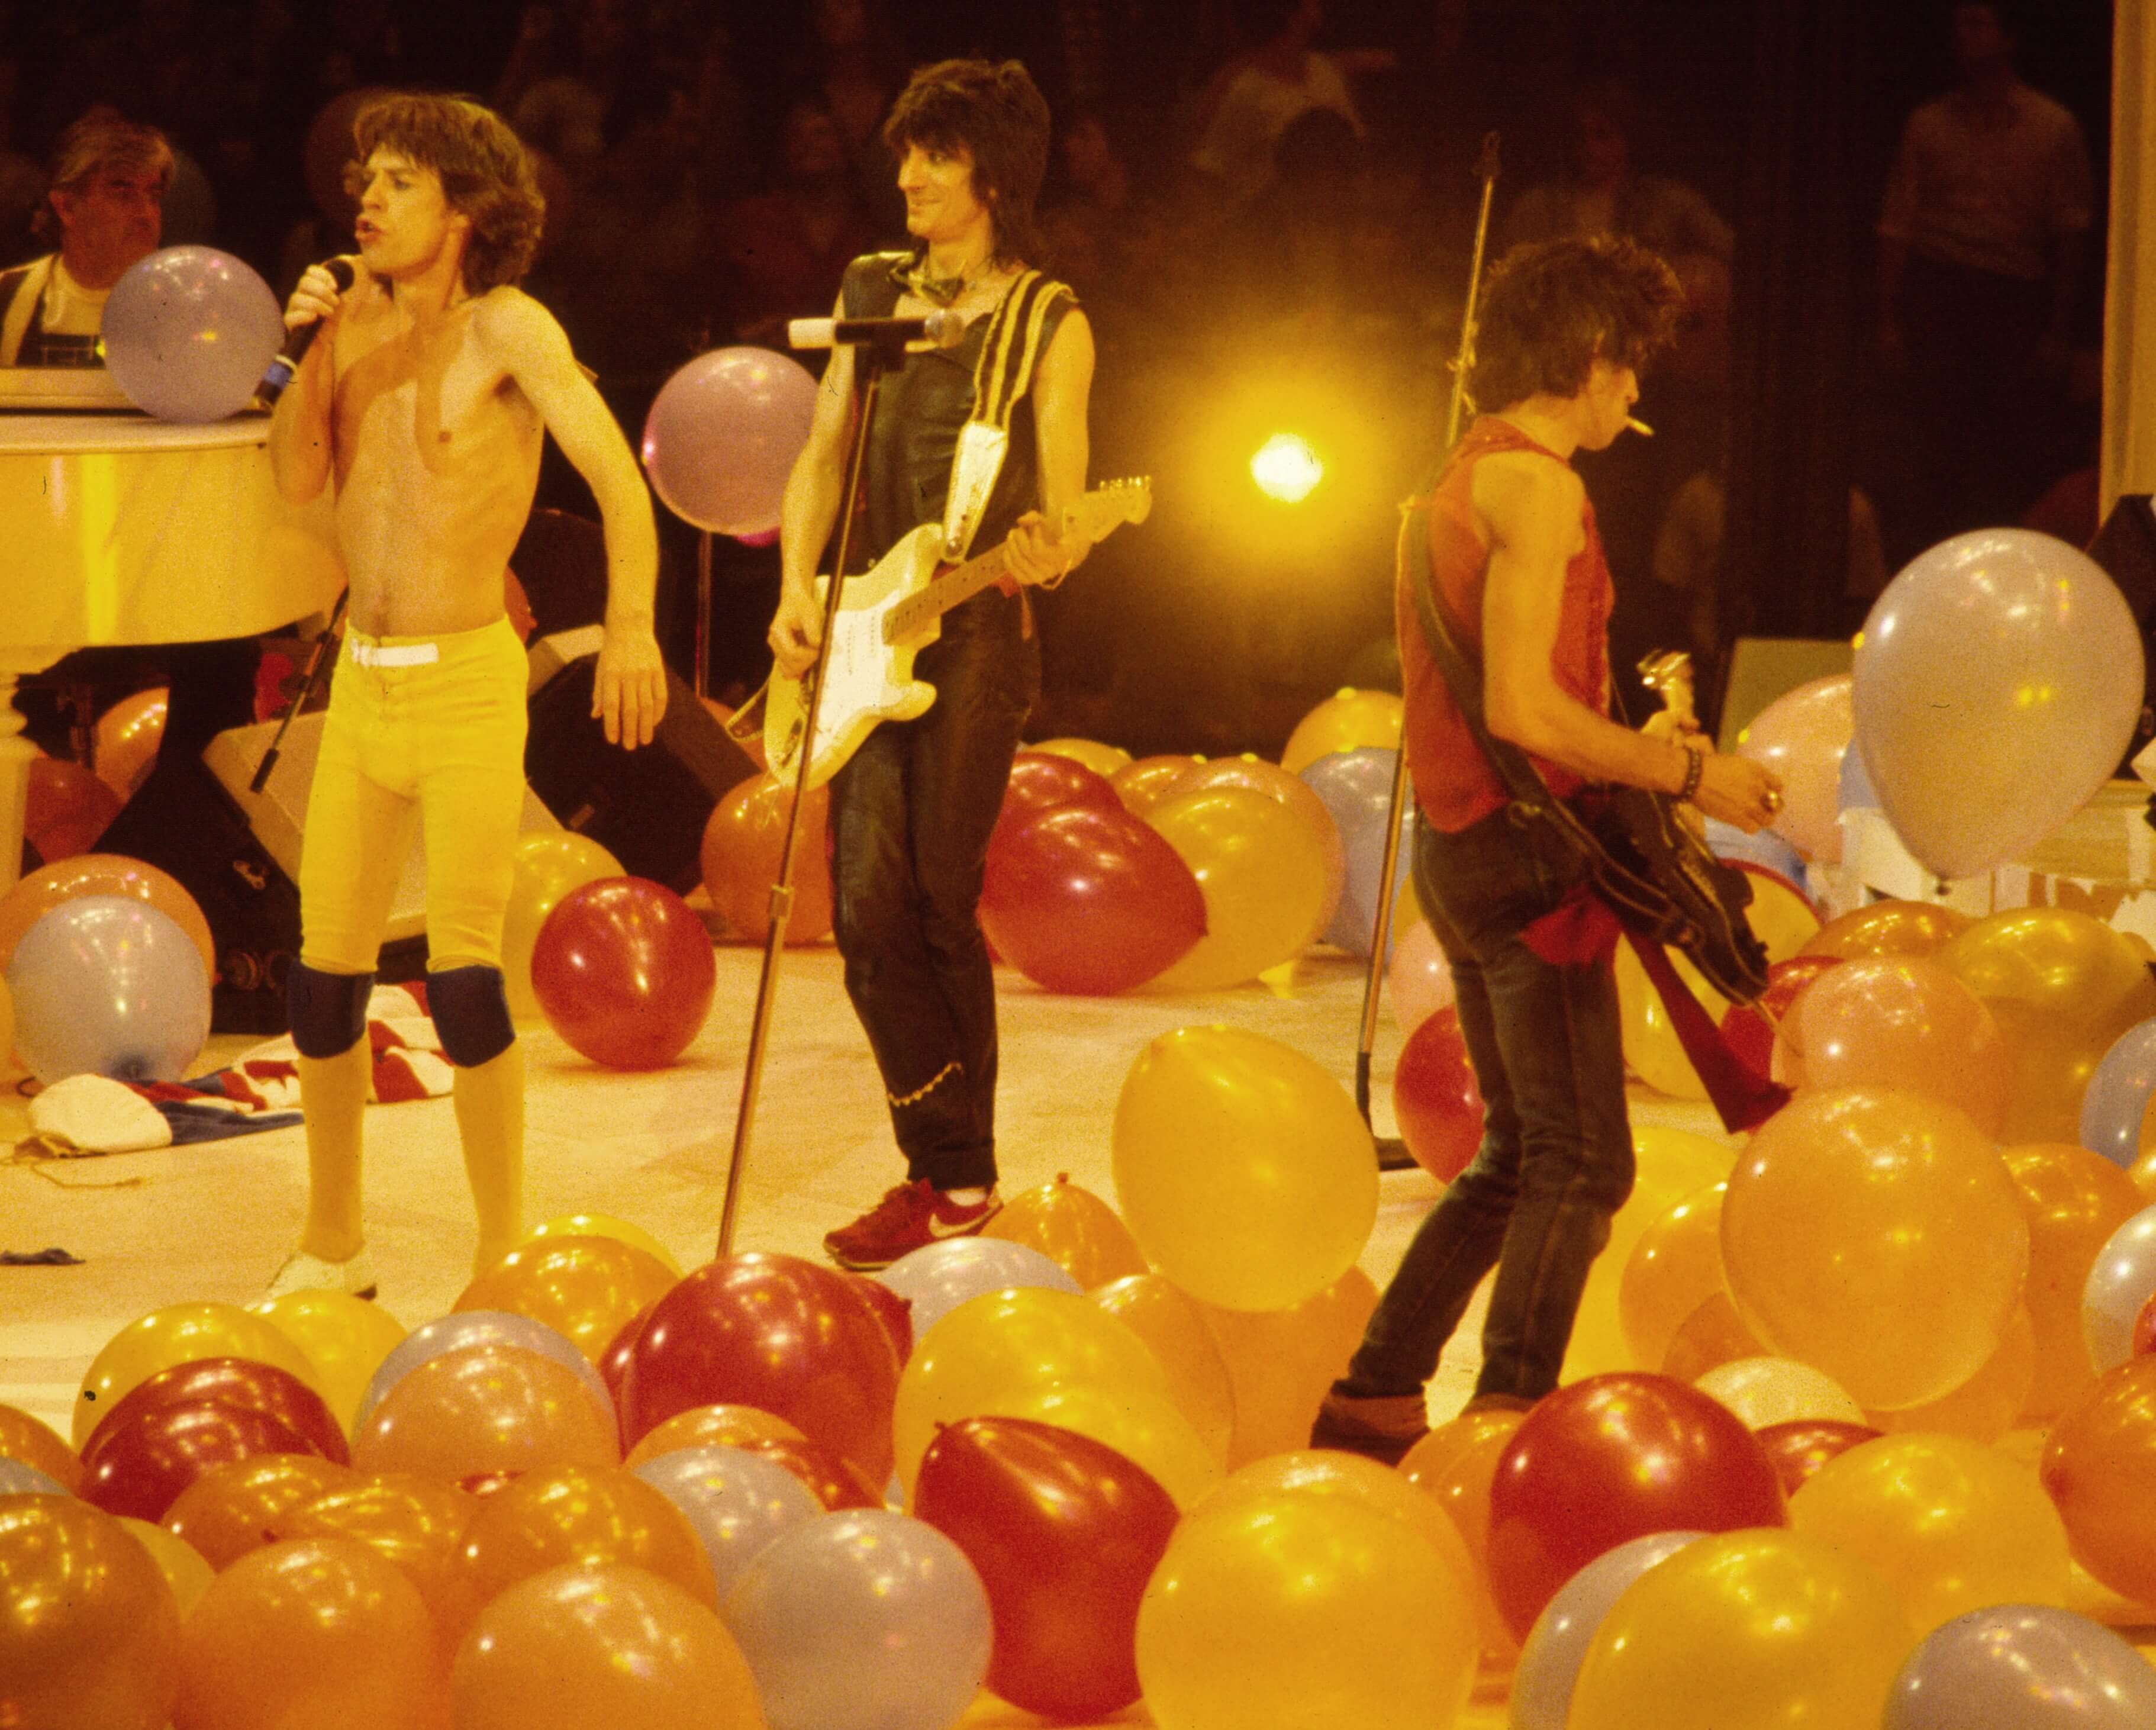 håndled Gentleman Rundt om Nena's '99 Luftballons' was Inspired by a Rolling Stones Concert